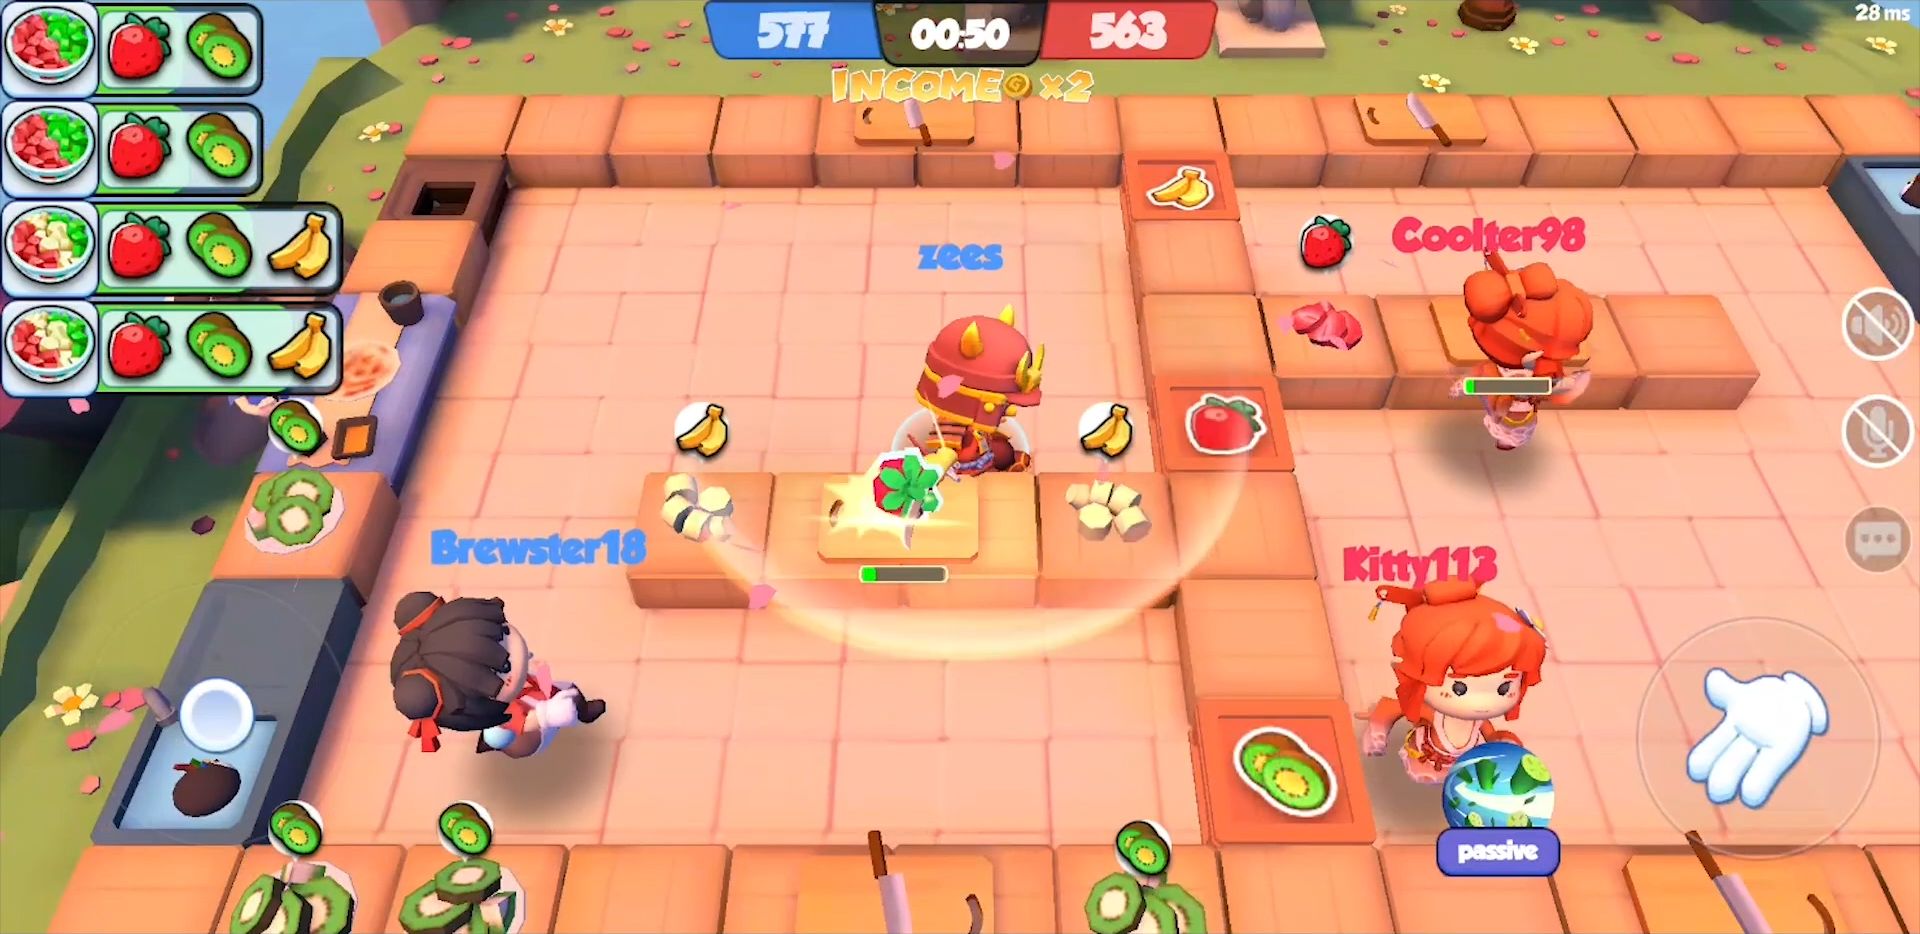 Cooking Battle! - Apps on Google Play